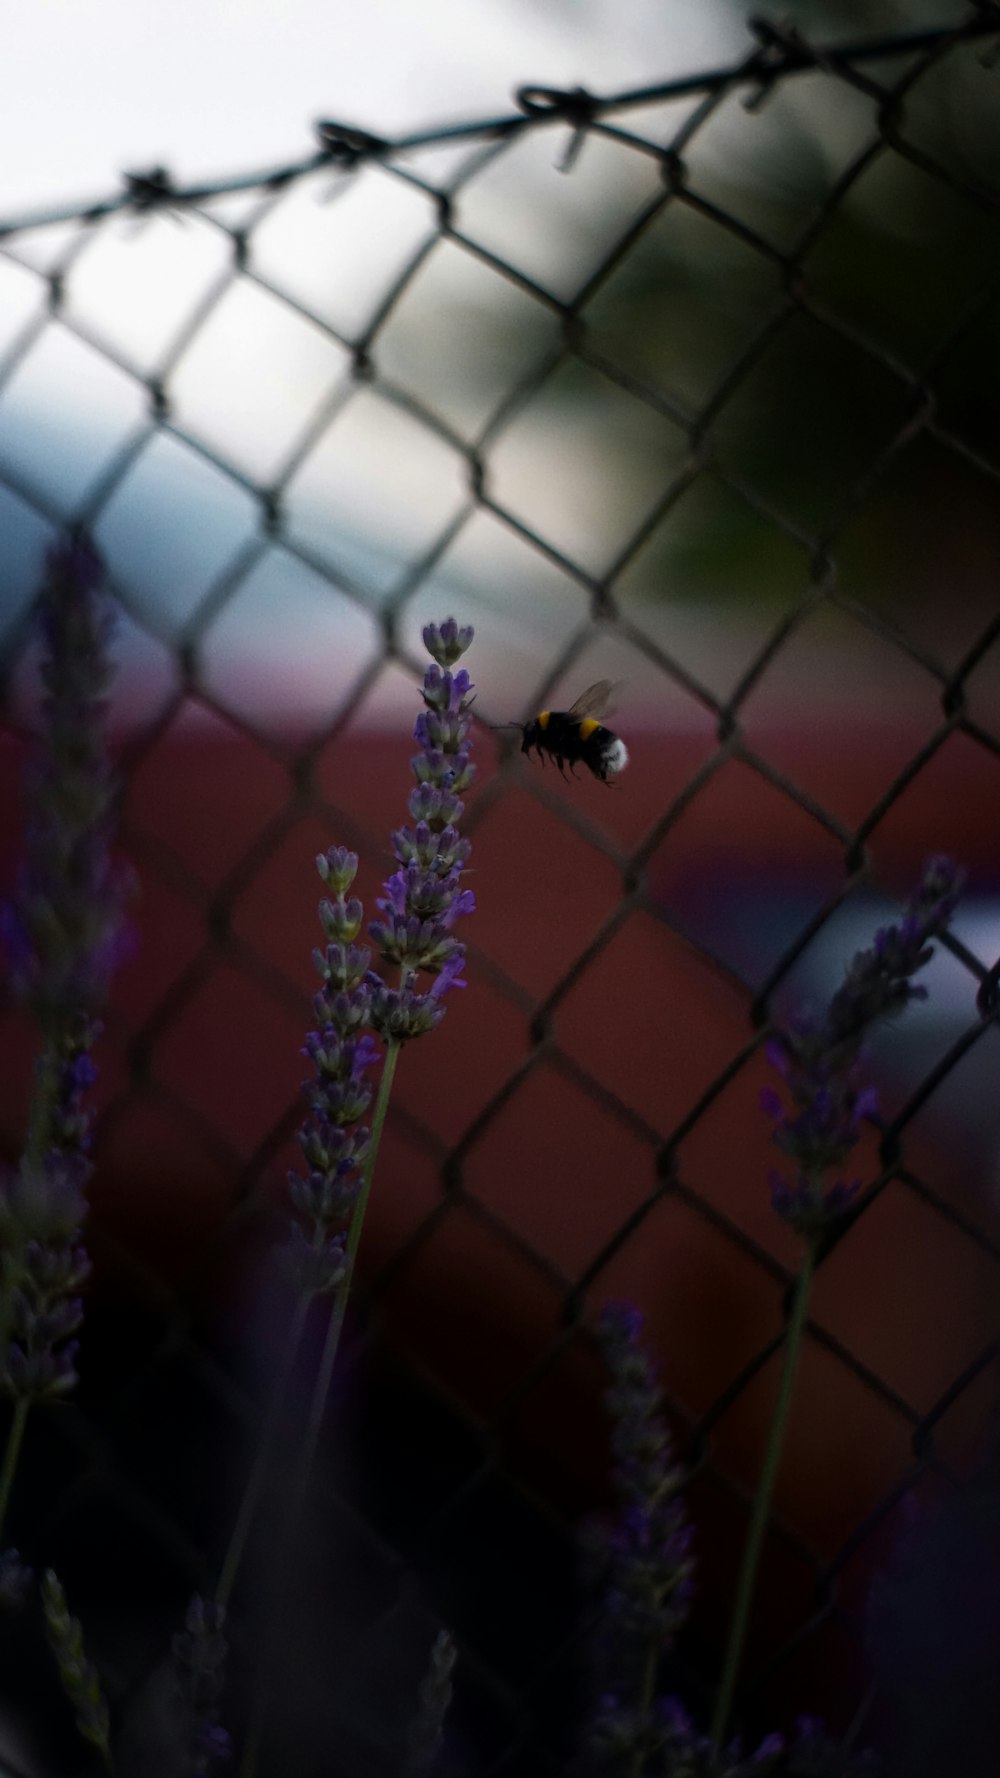 a bee flying over a purple flower behind a fence